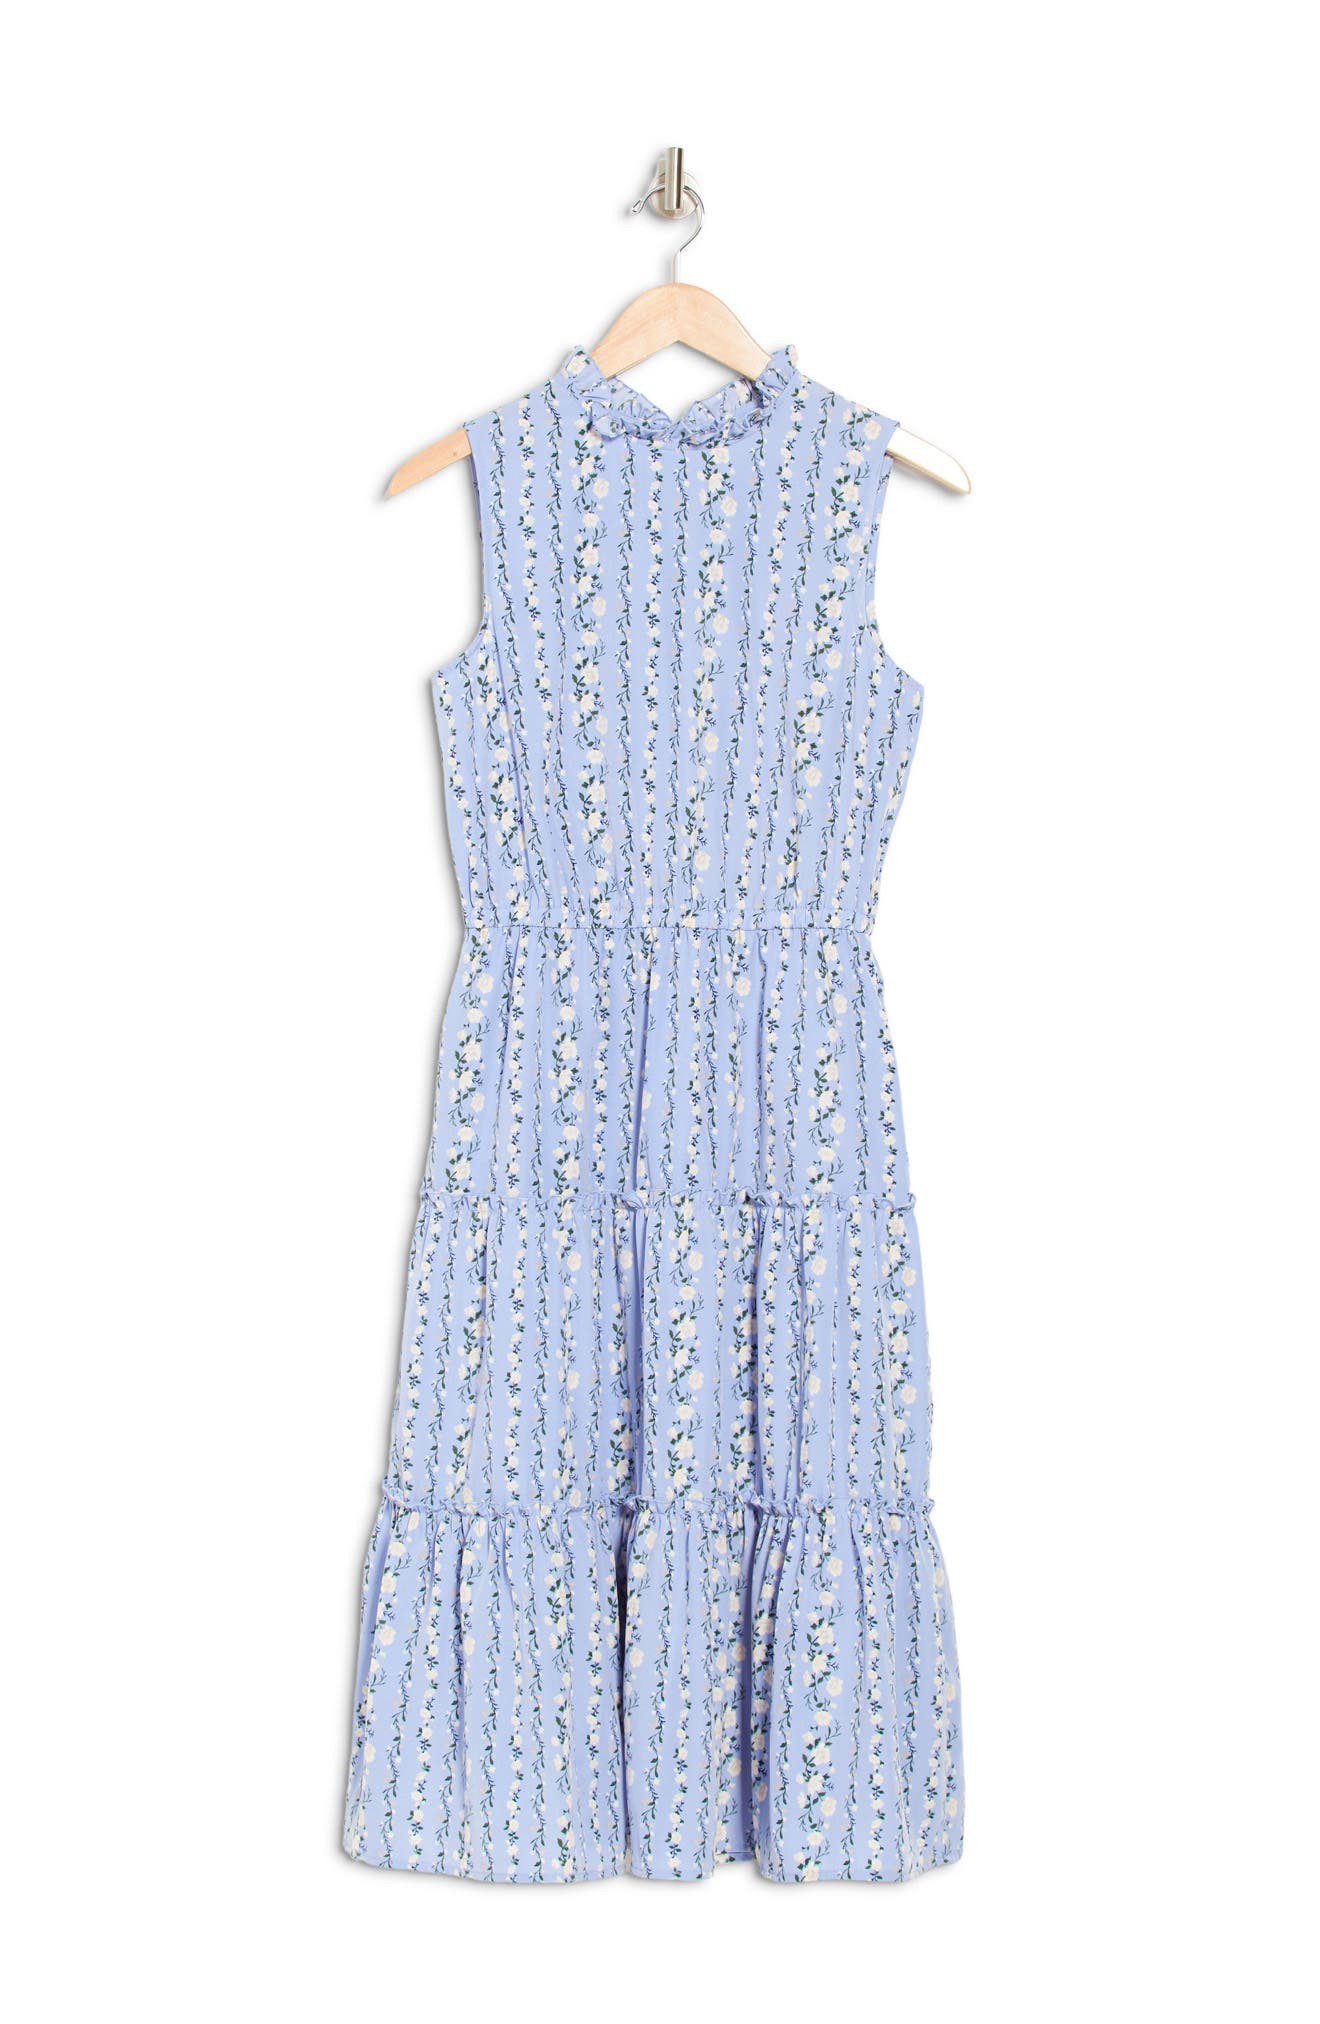 Melloday Floral Sleeveless Tiered Dress In Blue/white